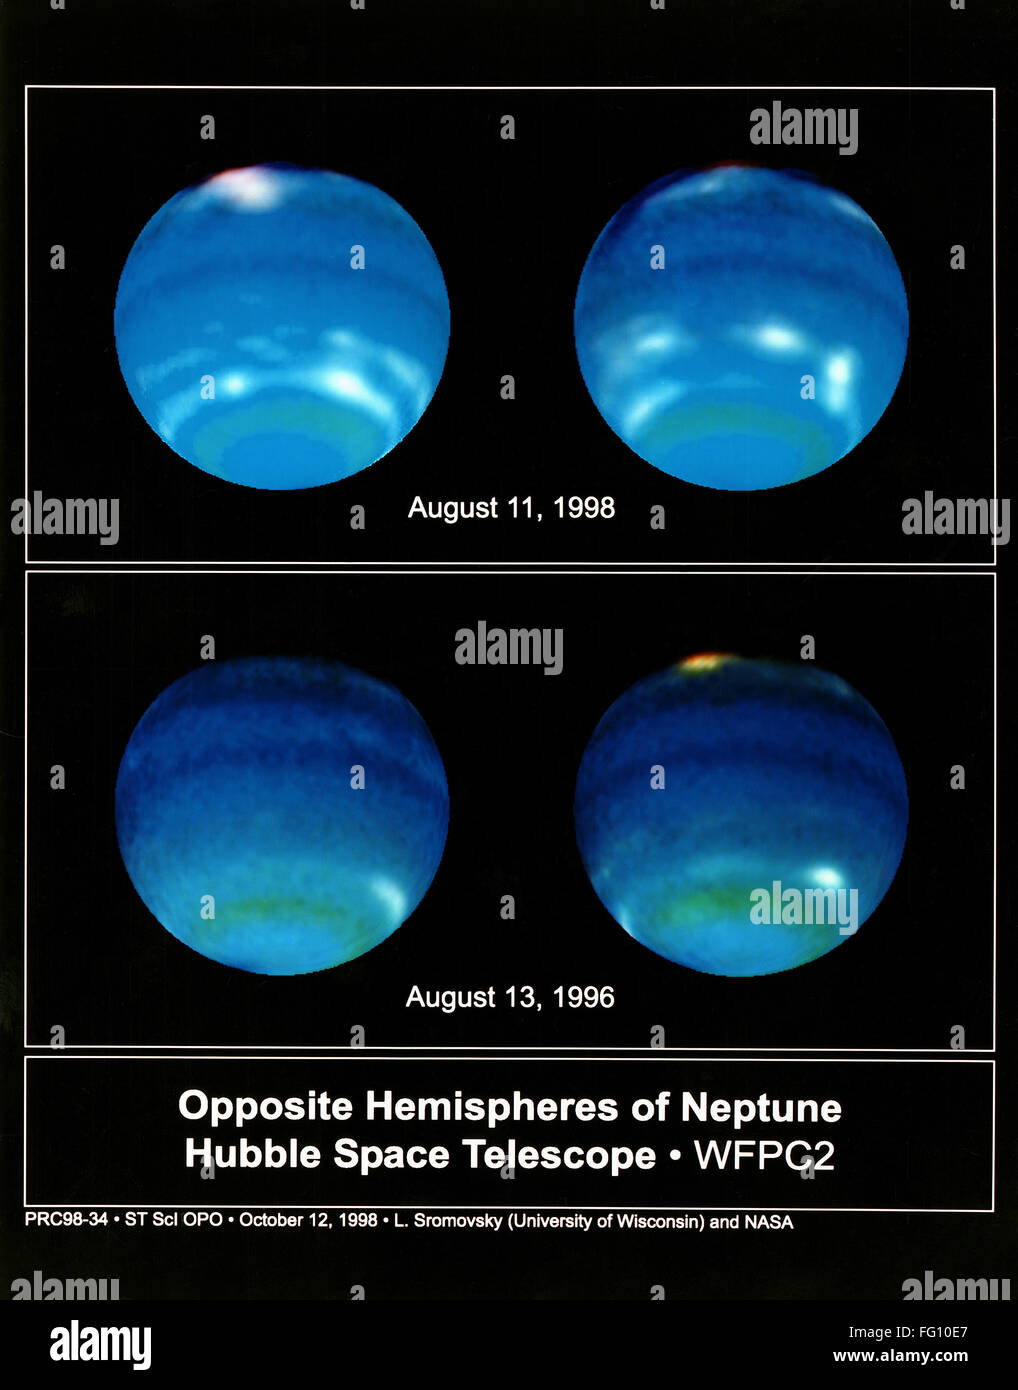 NEPTUNE: HEMISPHERES. /nTwo pairs of photographs showing the opposite hemispheres of Neptune, taken by NASA's Hubble Space Telescope, 11 August 1998 (top) and 13 August 1996. Stock Photo